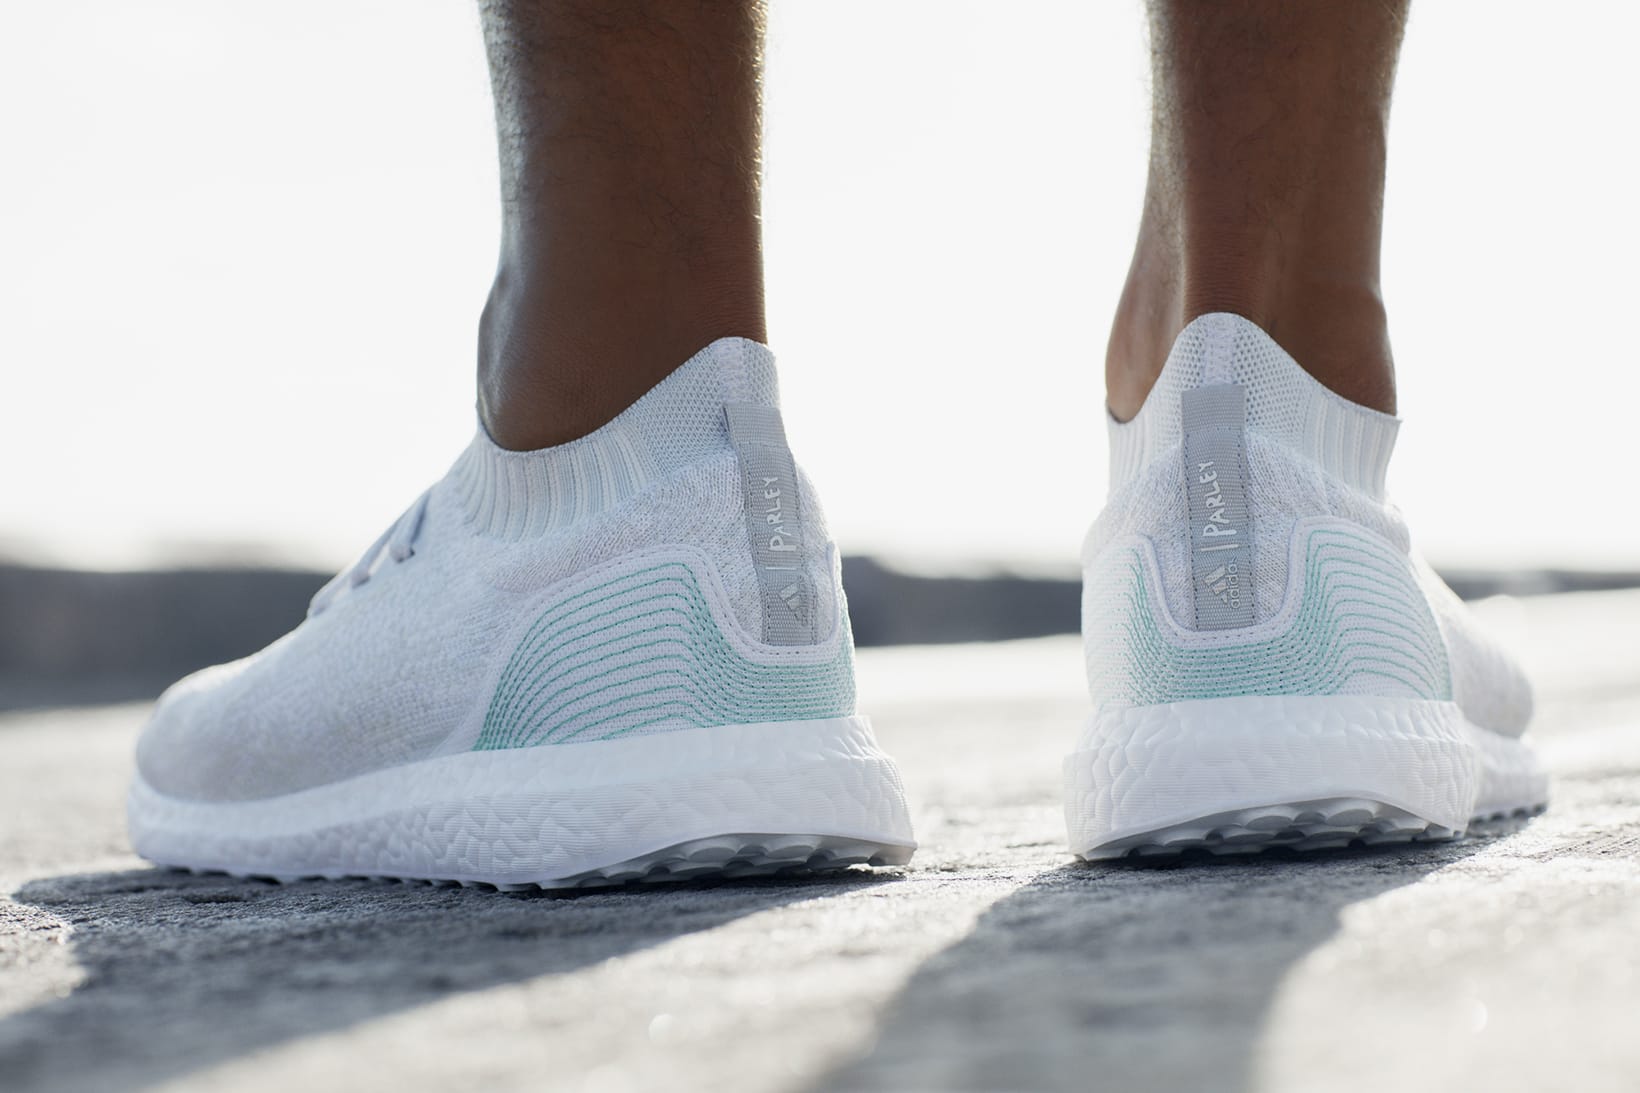 Oceans x adidas Ultra Boost Uncaged 